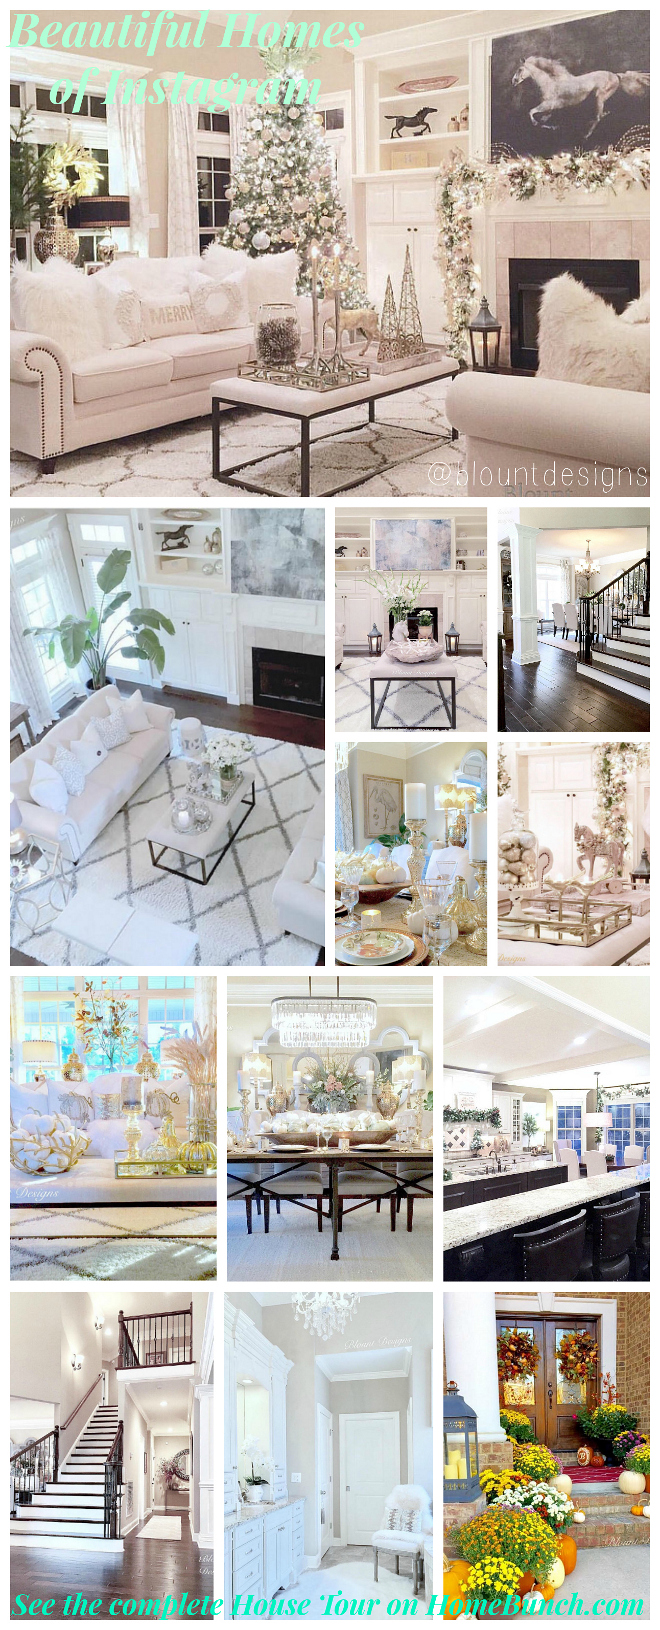 Beautiful Homes of Instagram. #BeautifulHomes #Instagram beautiful-homes-of-instagram